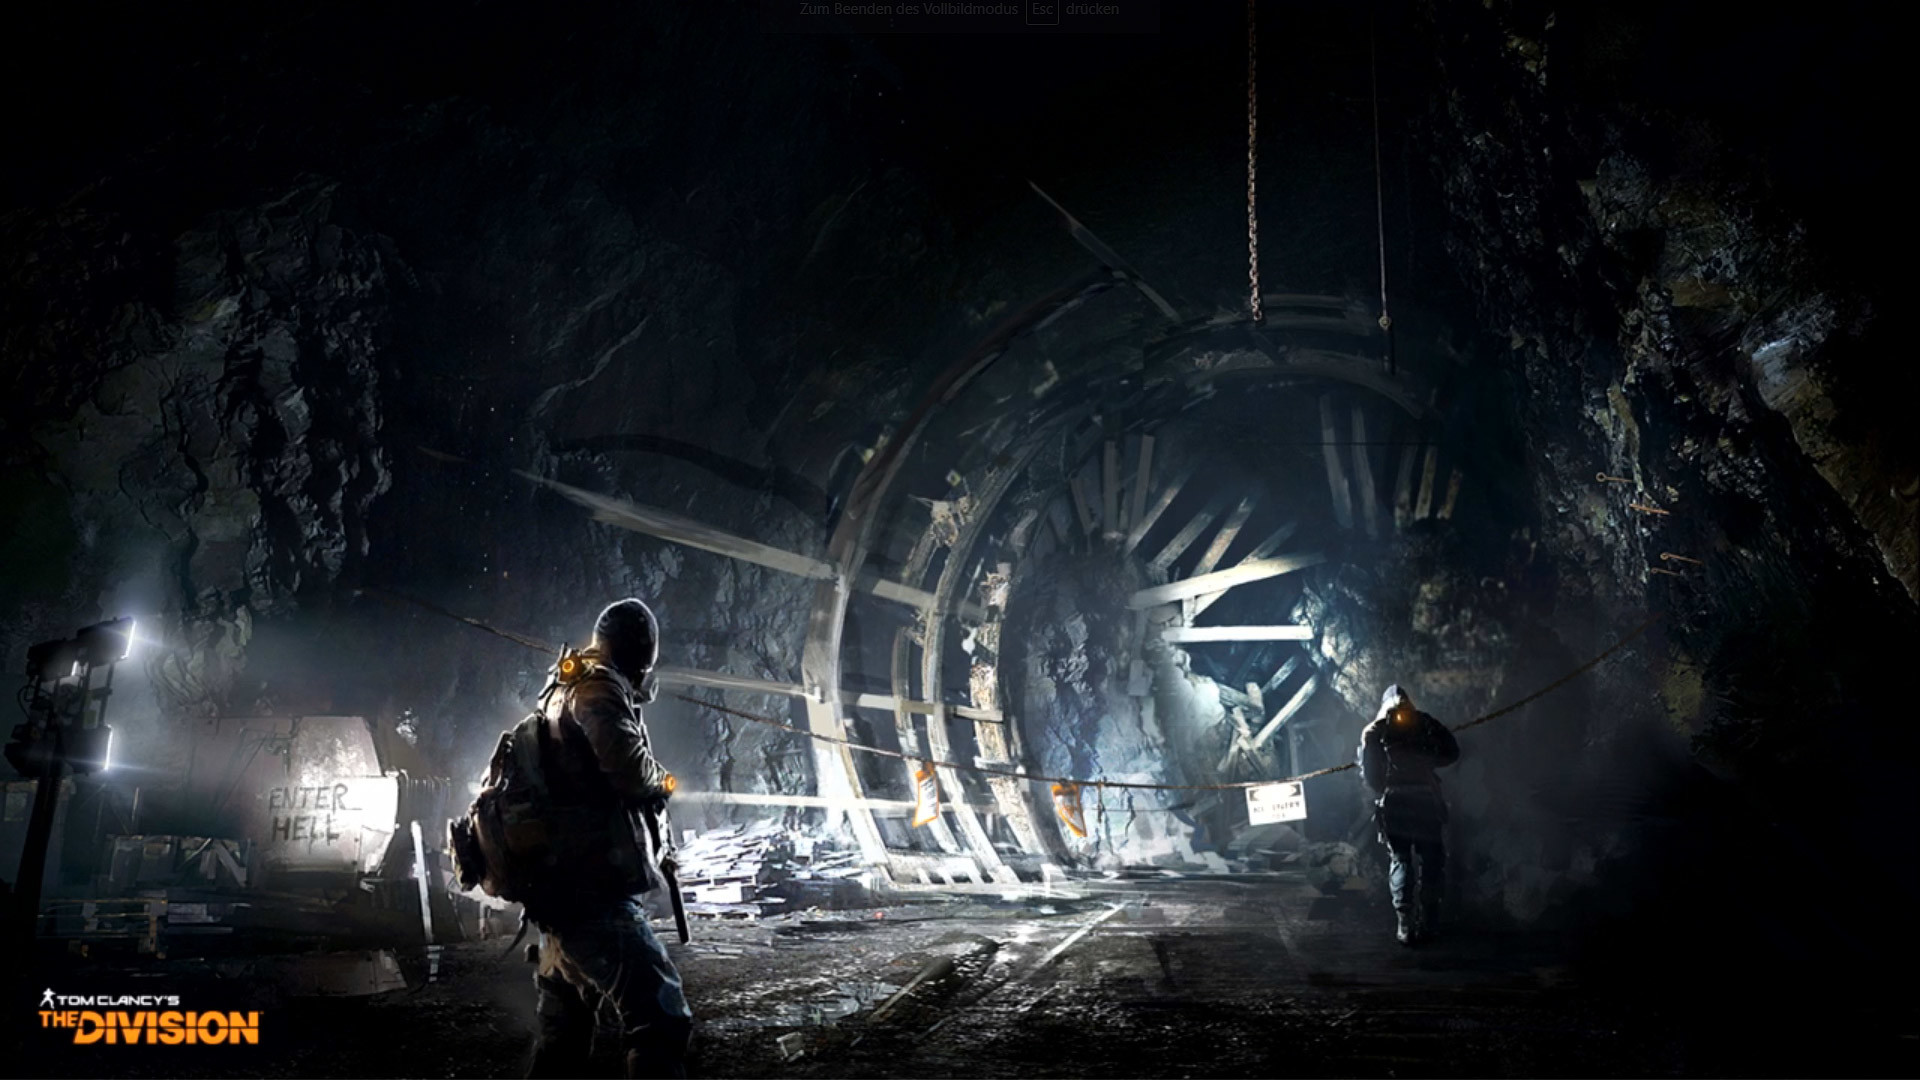 1920x1080 The Division at PAX West – Survival: New “Hunter” Artwork Released